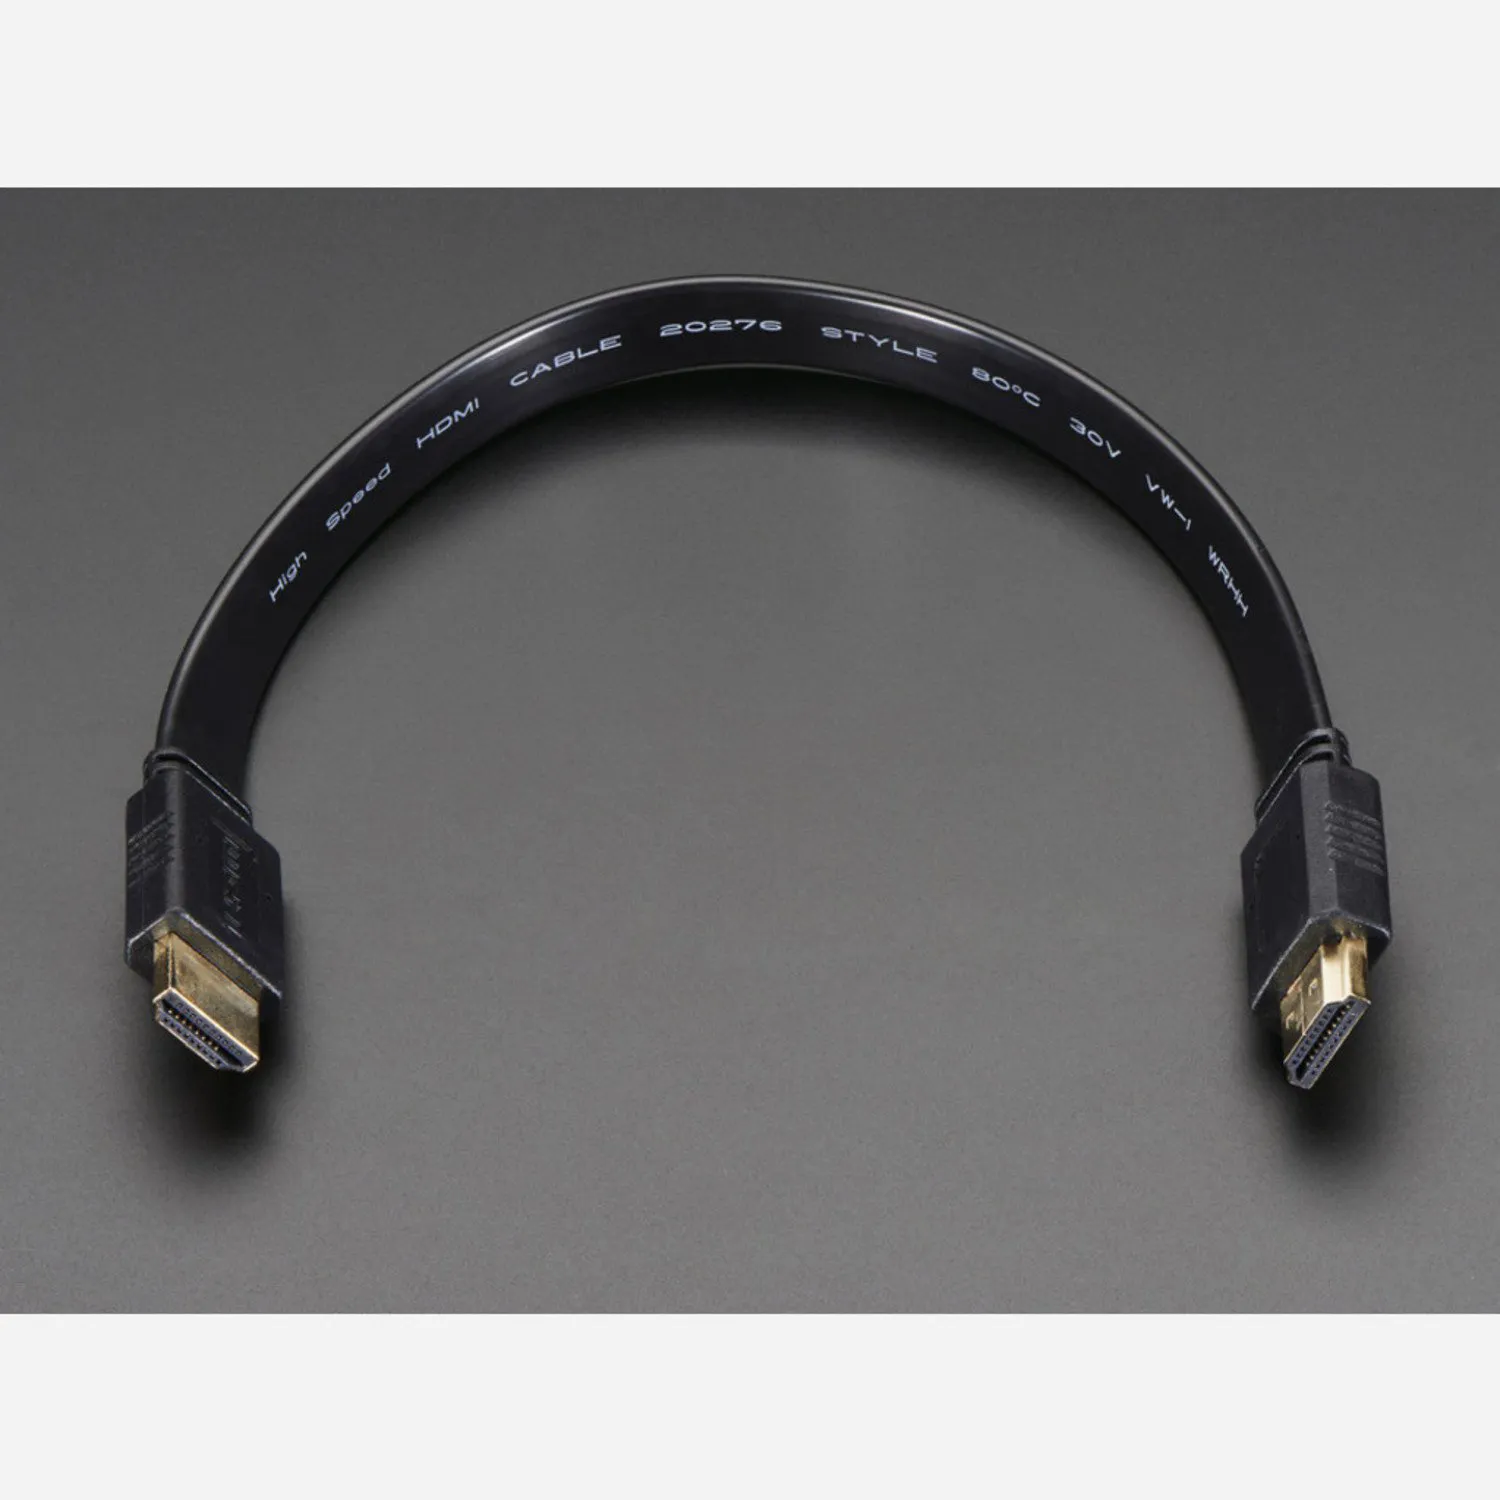 Photo of HDMI Flat Cable - 1 foot / 30cm long